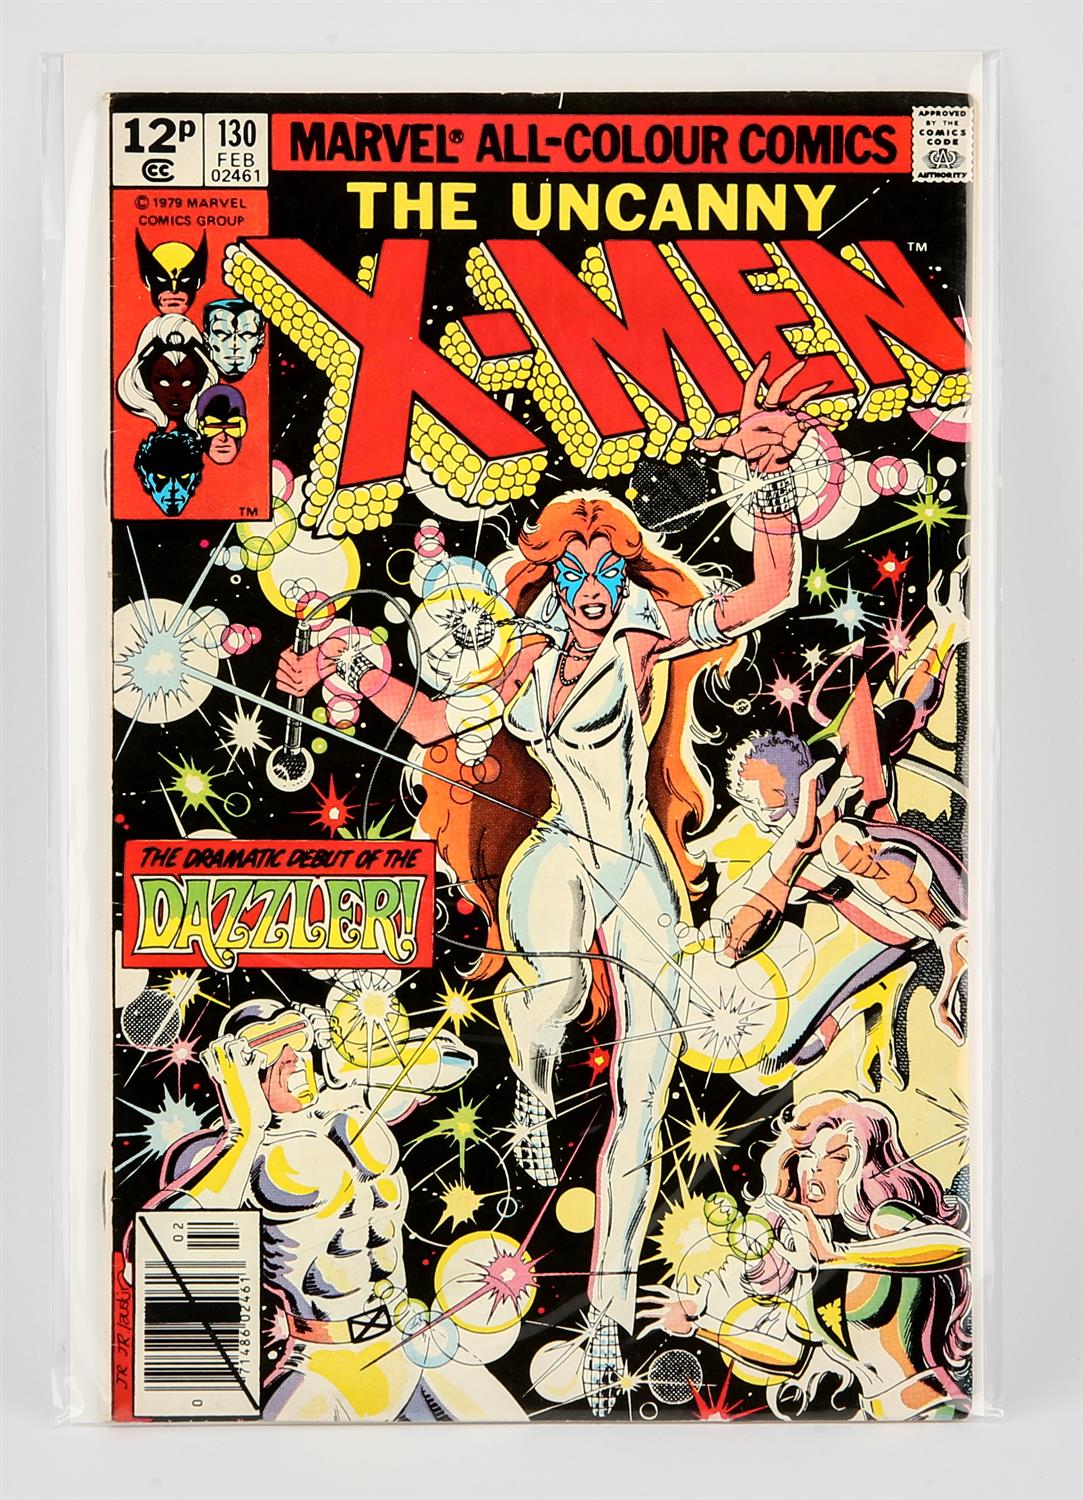 Marvel Comics: The Uncanny X-Men No. 130 featuring the 1st appearance of Dazzler (Emma Frost)